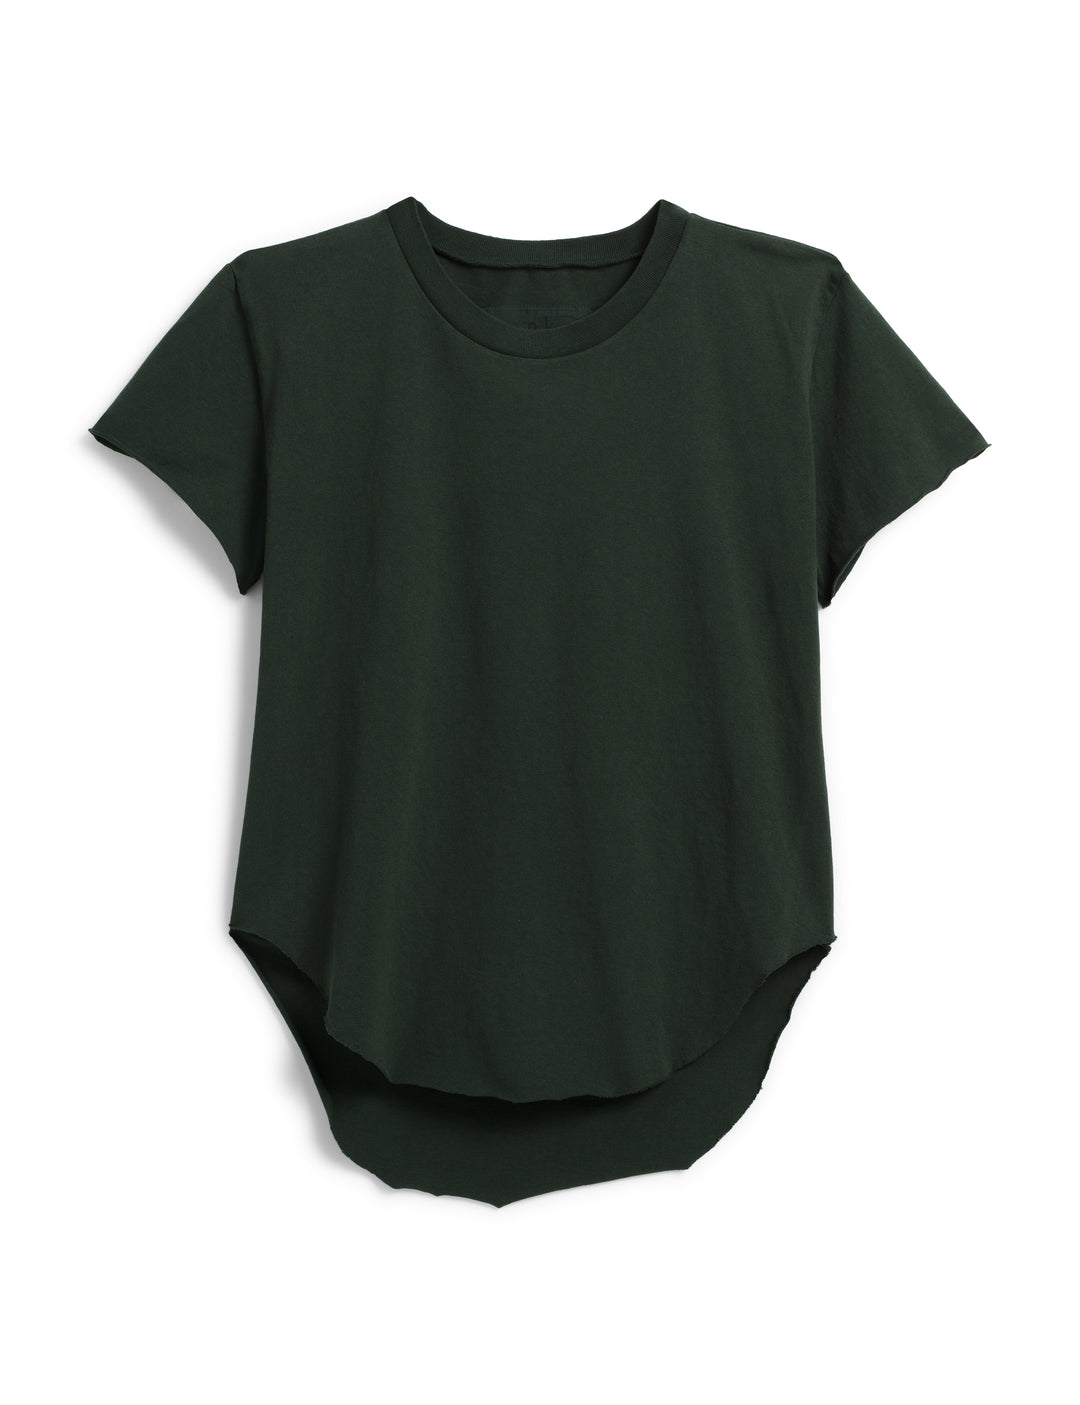 Frank & Eileen - Theo Perfect Tee in Evergreen